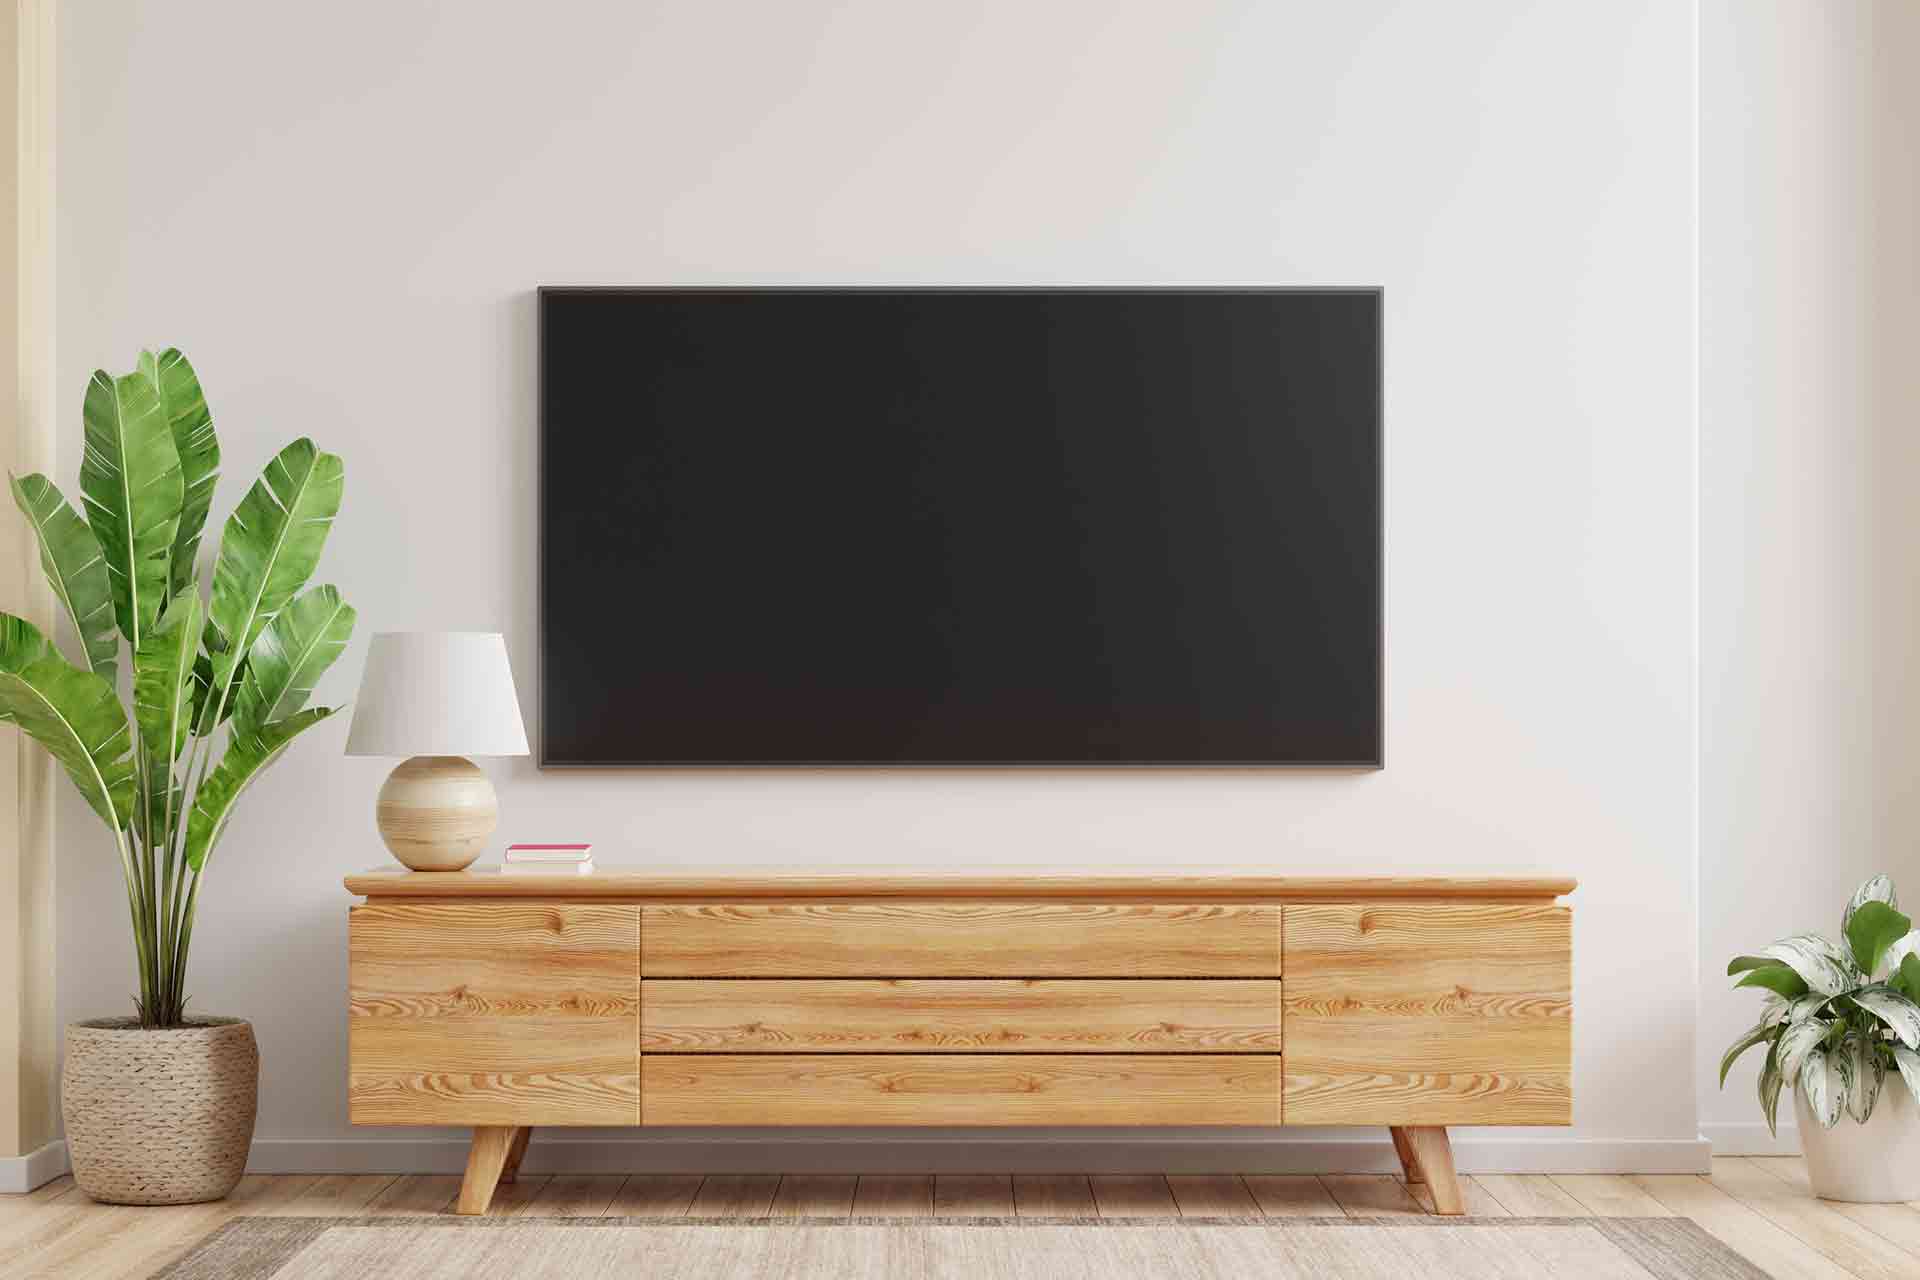 How to Wall Mount a TV, Step-by-Step Guide